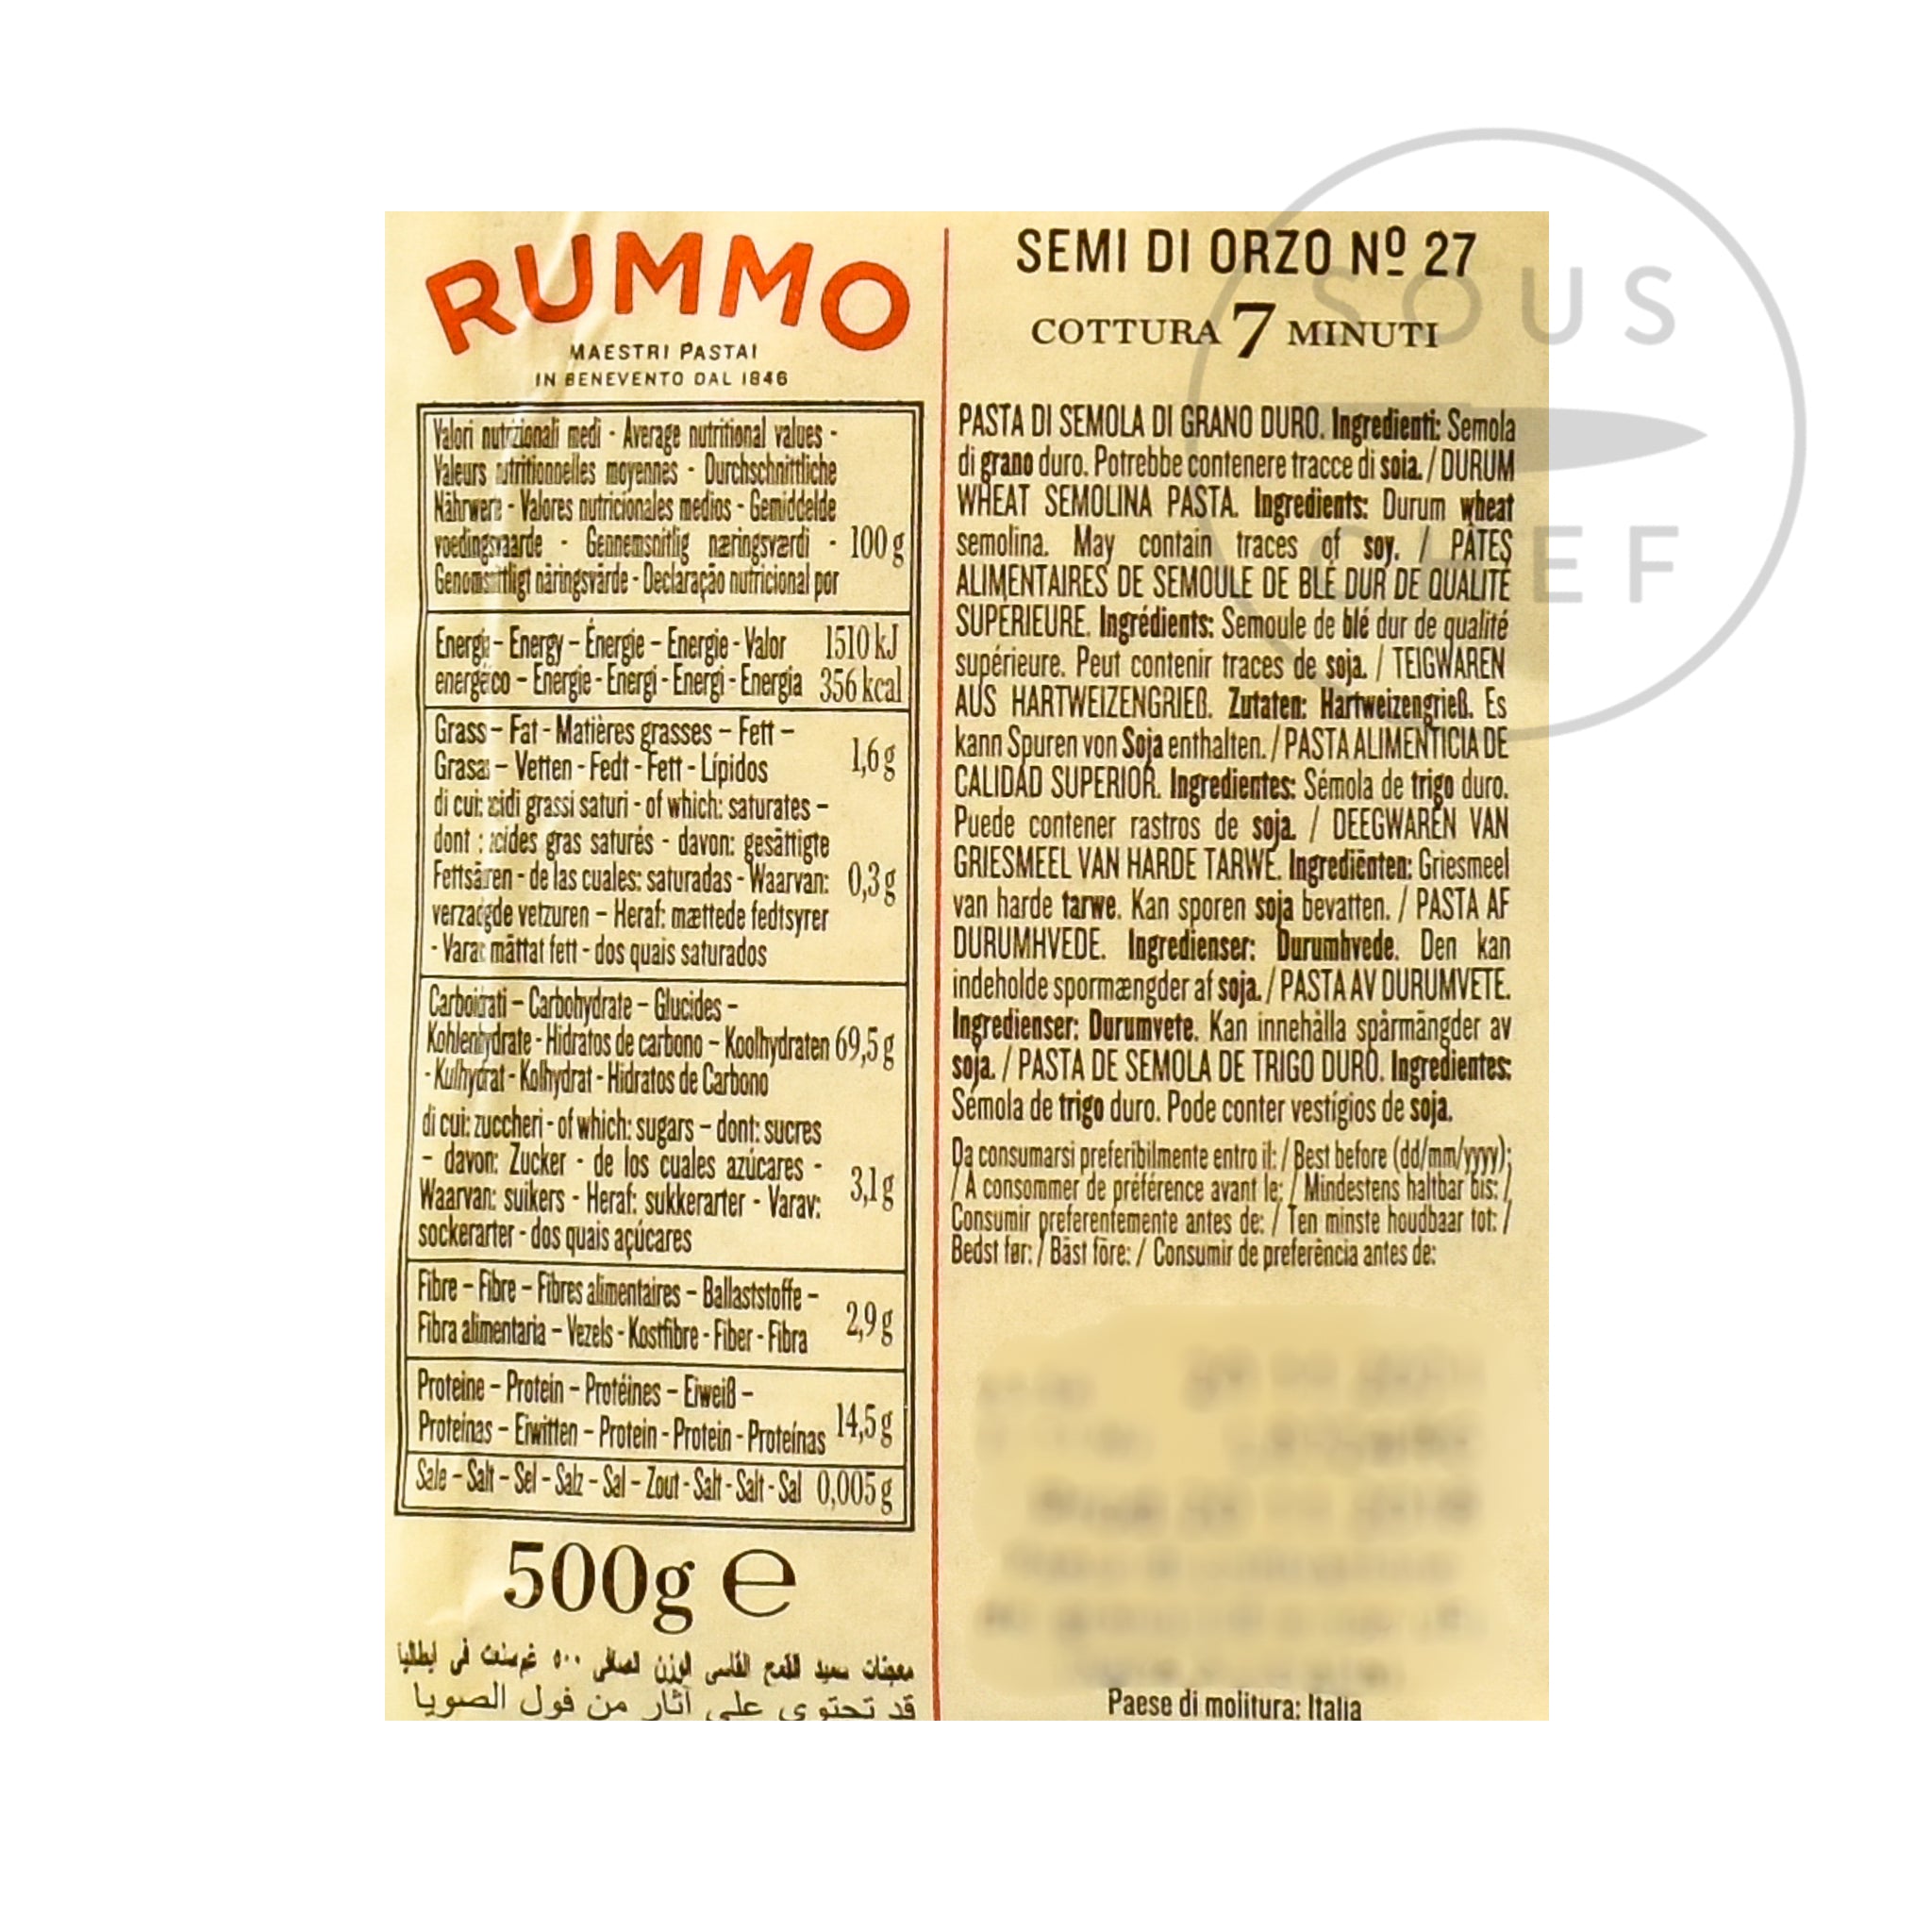 Rummo orzo pasta semi di orzo ingredients and nutritional information